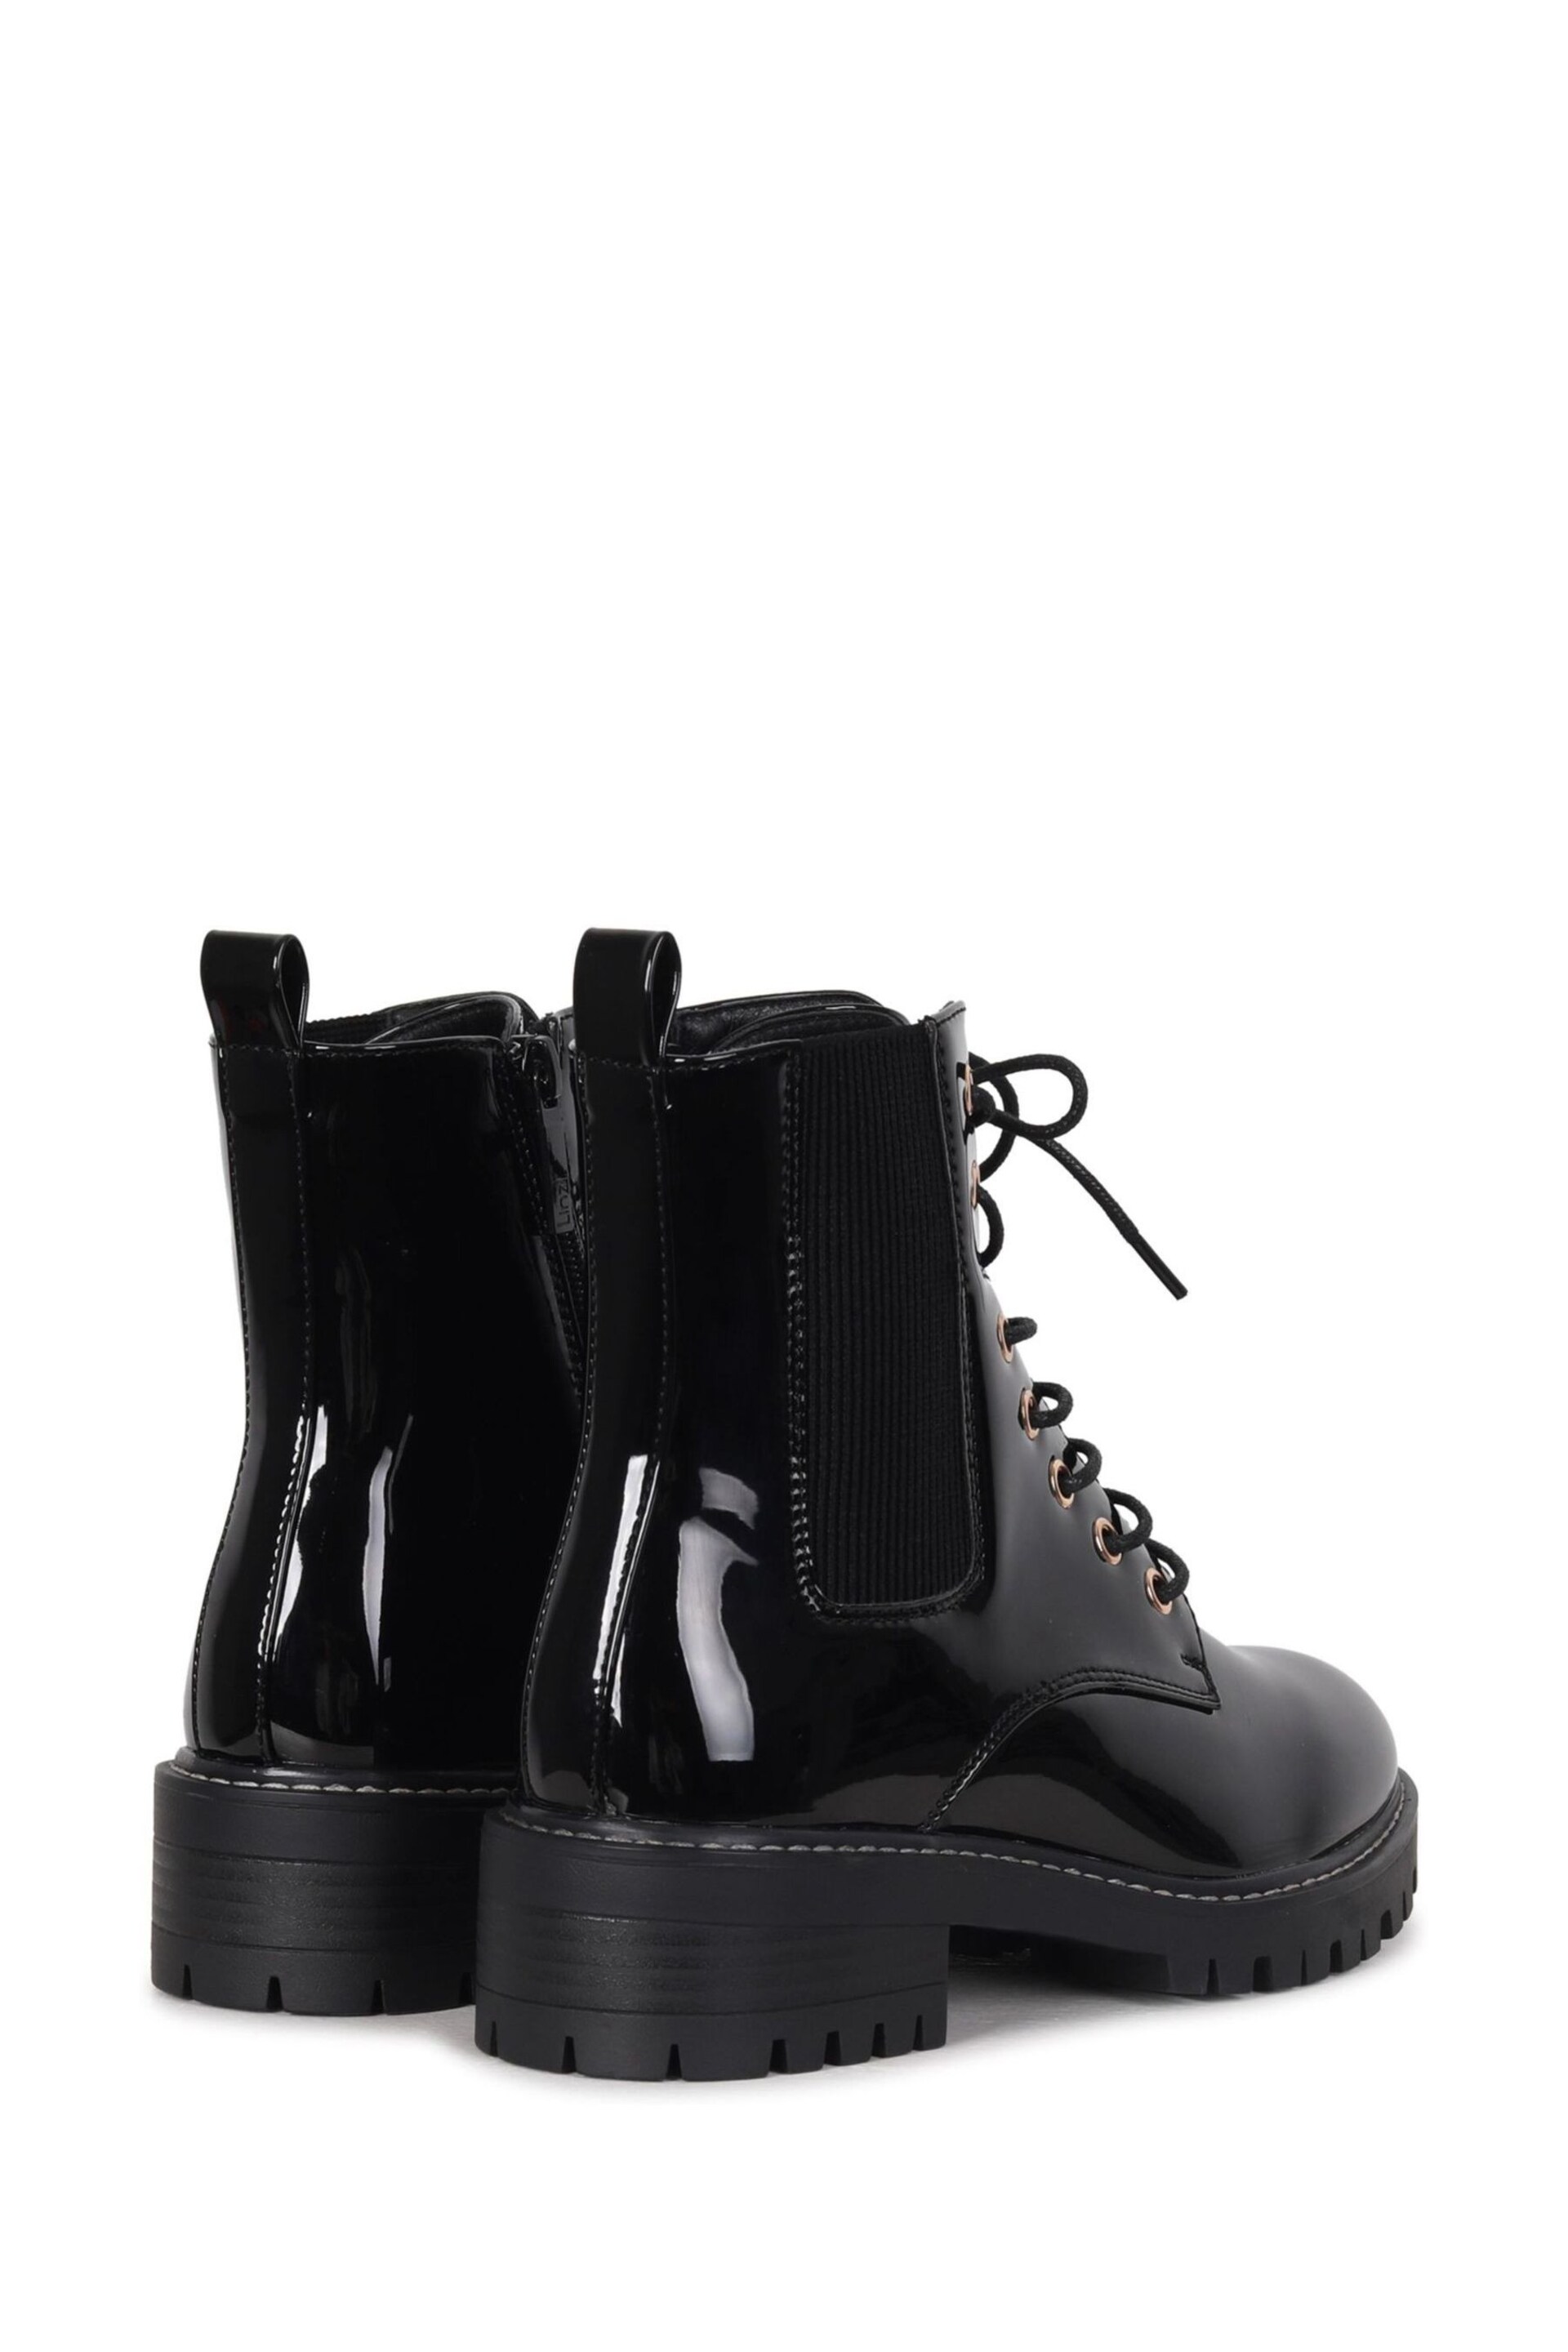 Linzi Black Layna Lace Up Ankle Boots With Zip Detail - Image 5 of 5